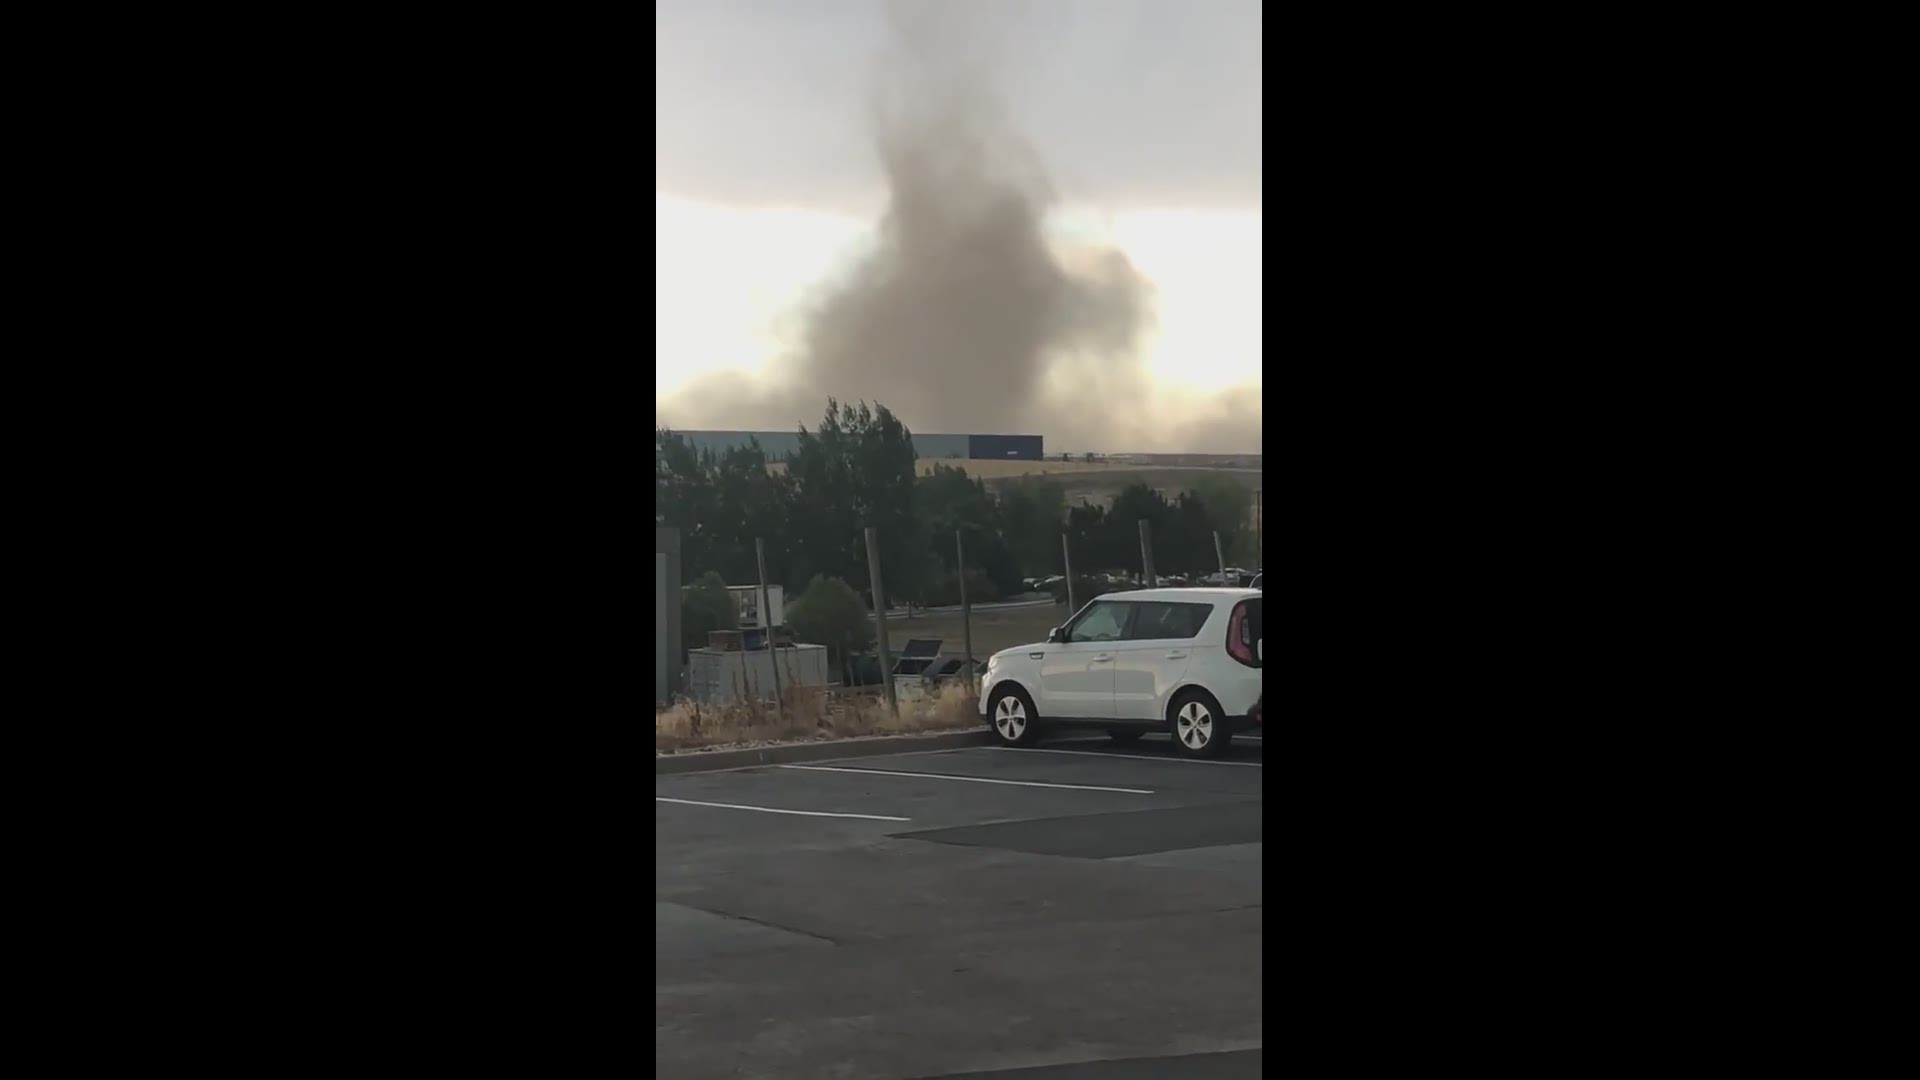 A rotating cloud of dust was spotted near Centennial Airport on Friday afternoon.